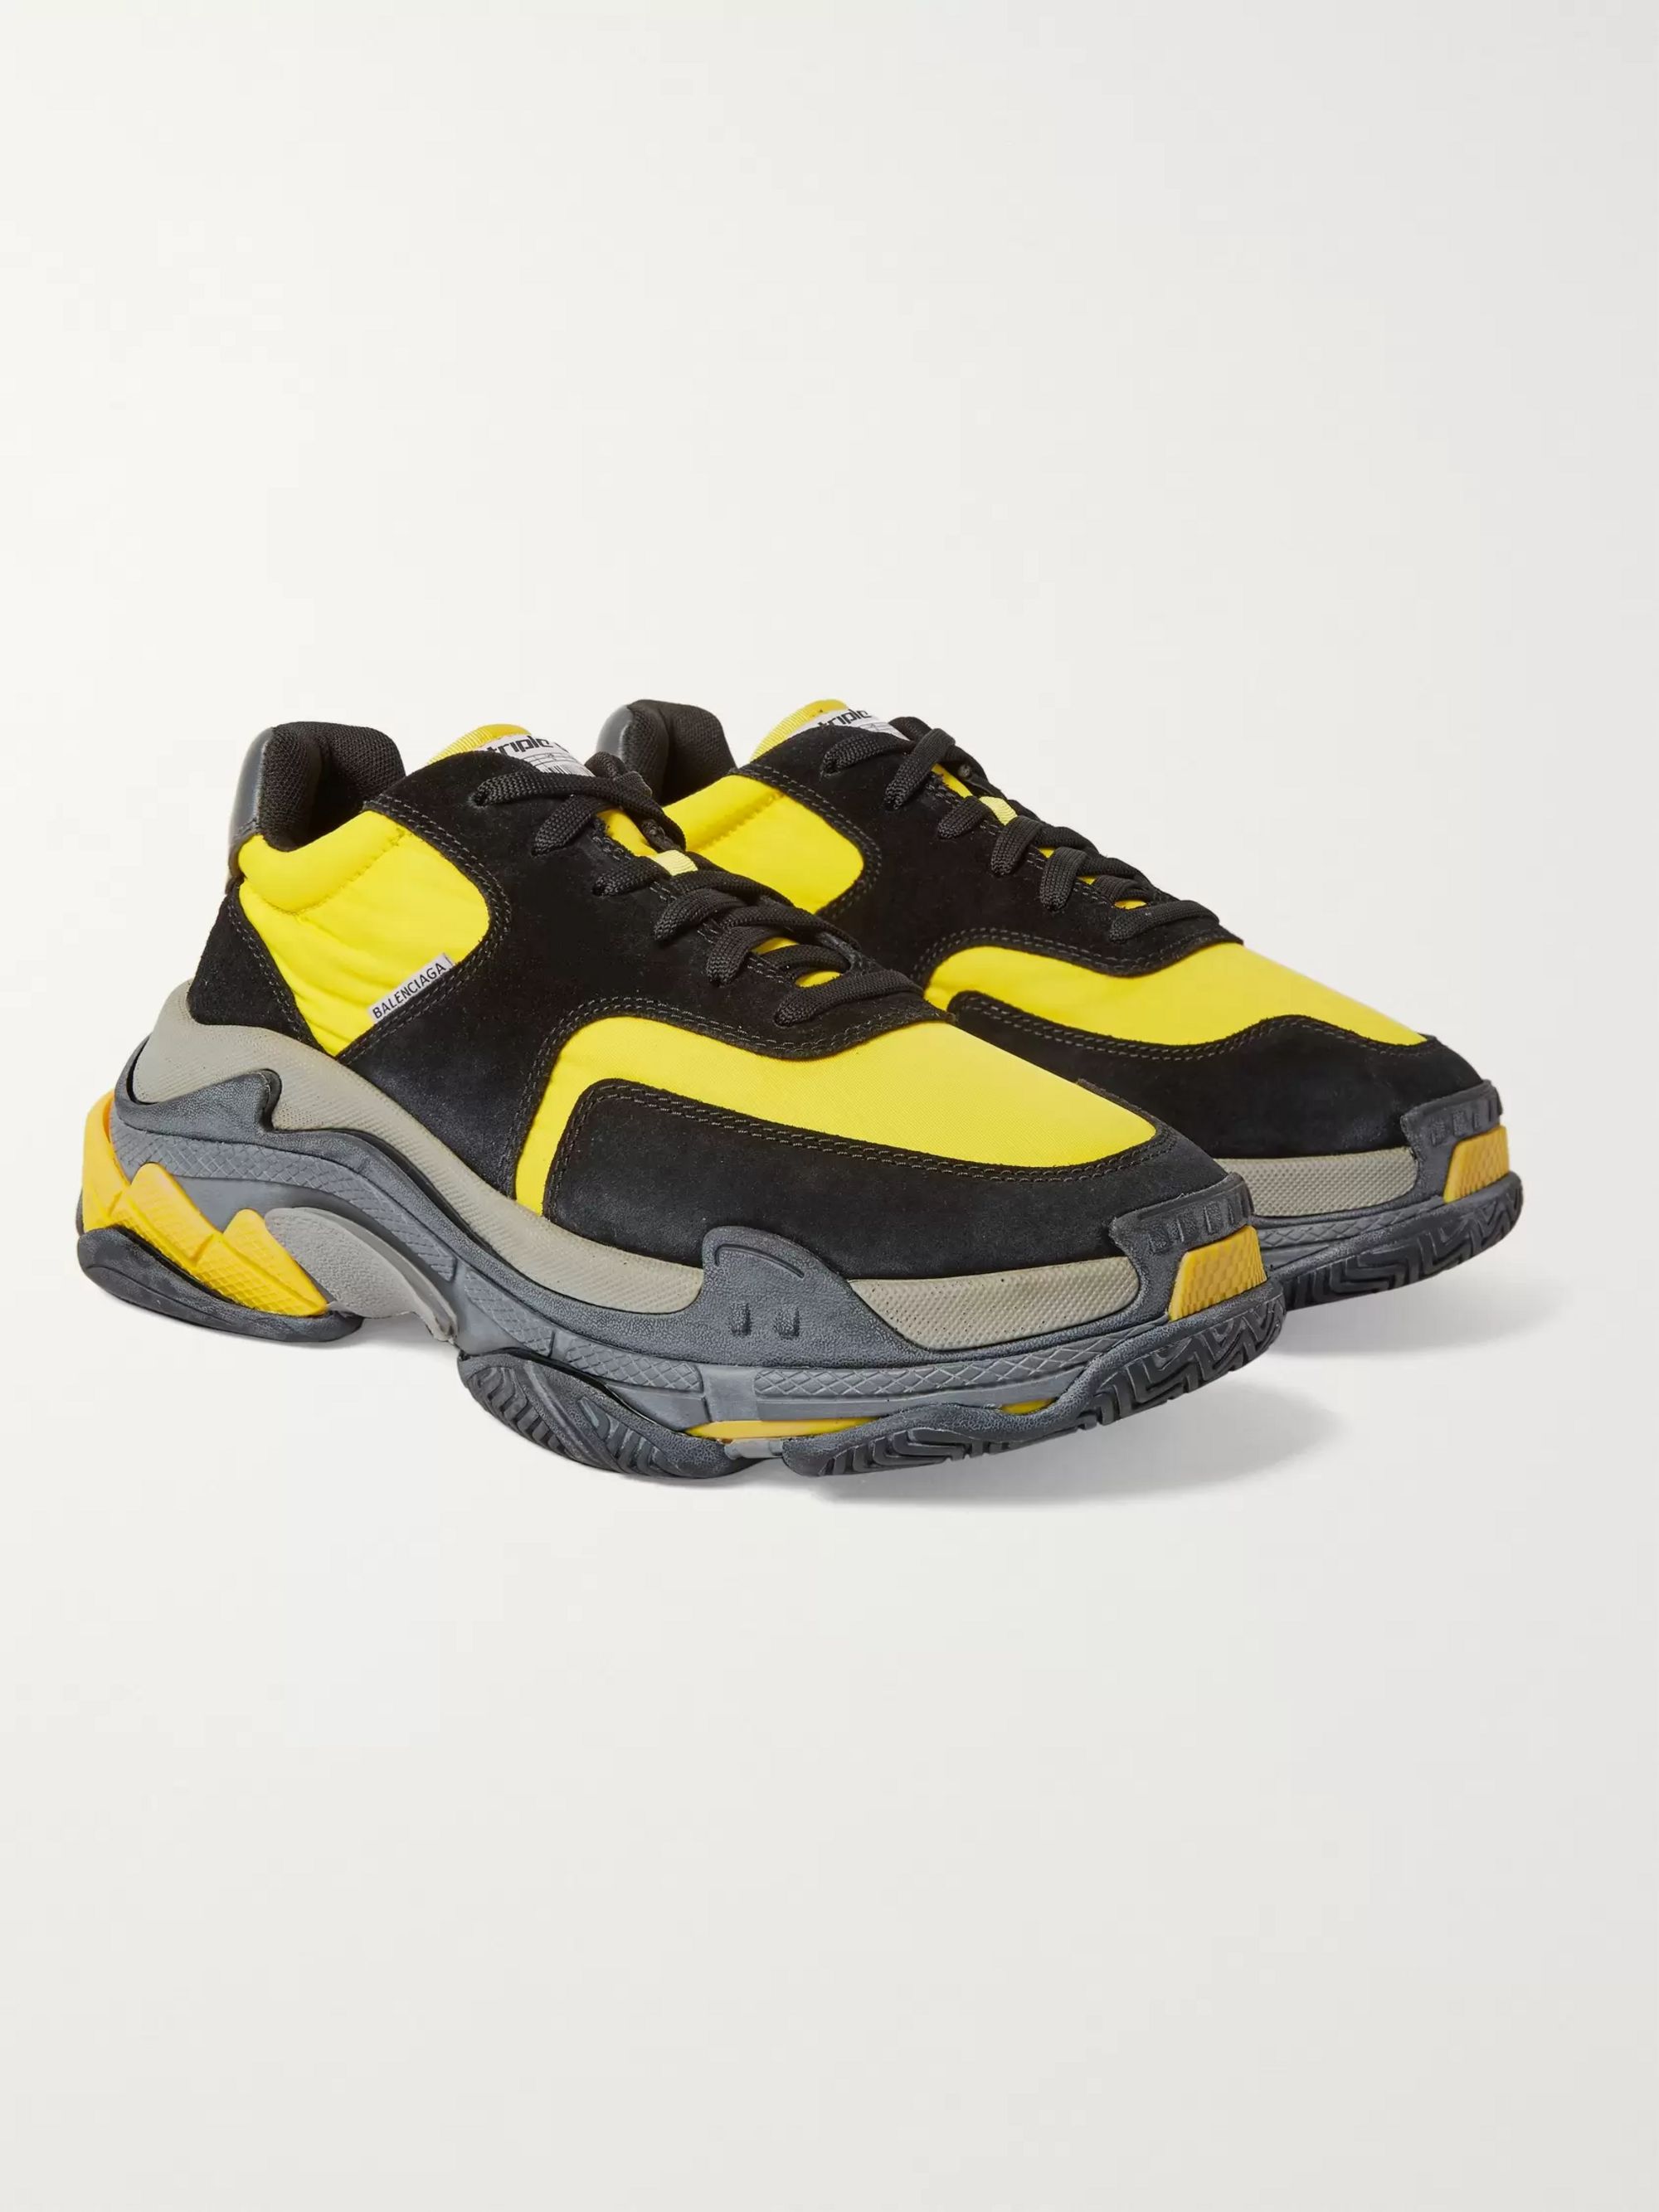 Balenciaga Black And Yellow Triple S Sneakers The Webster